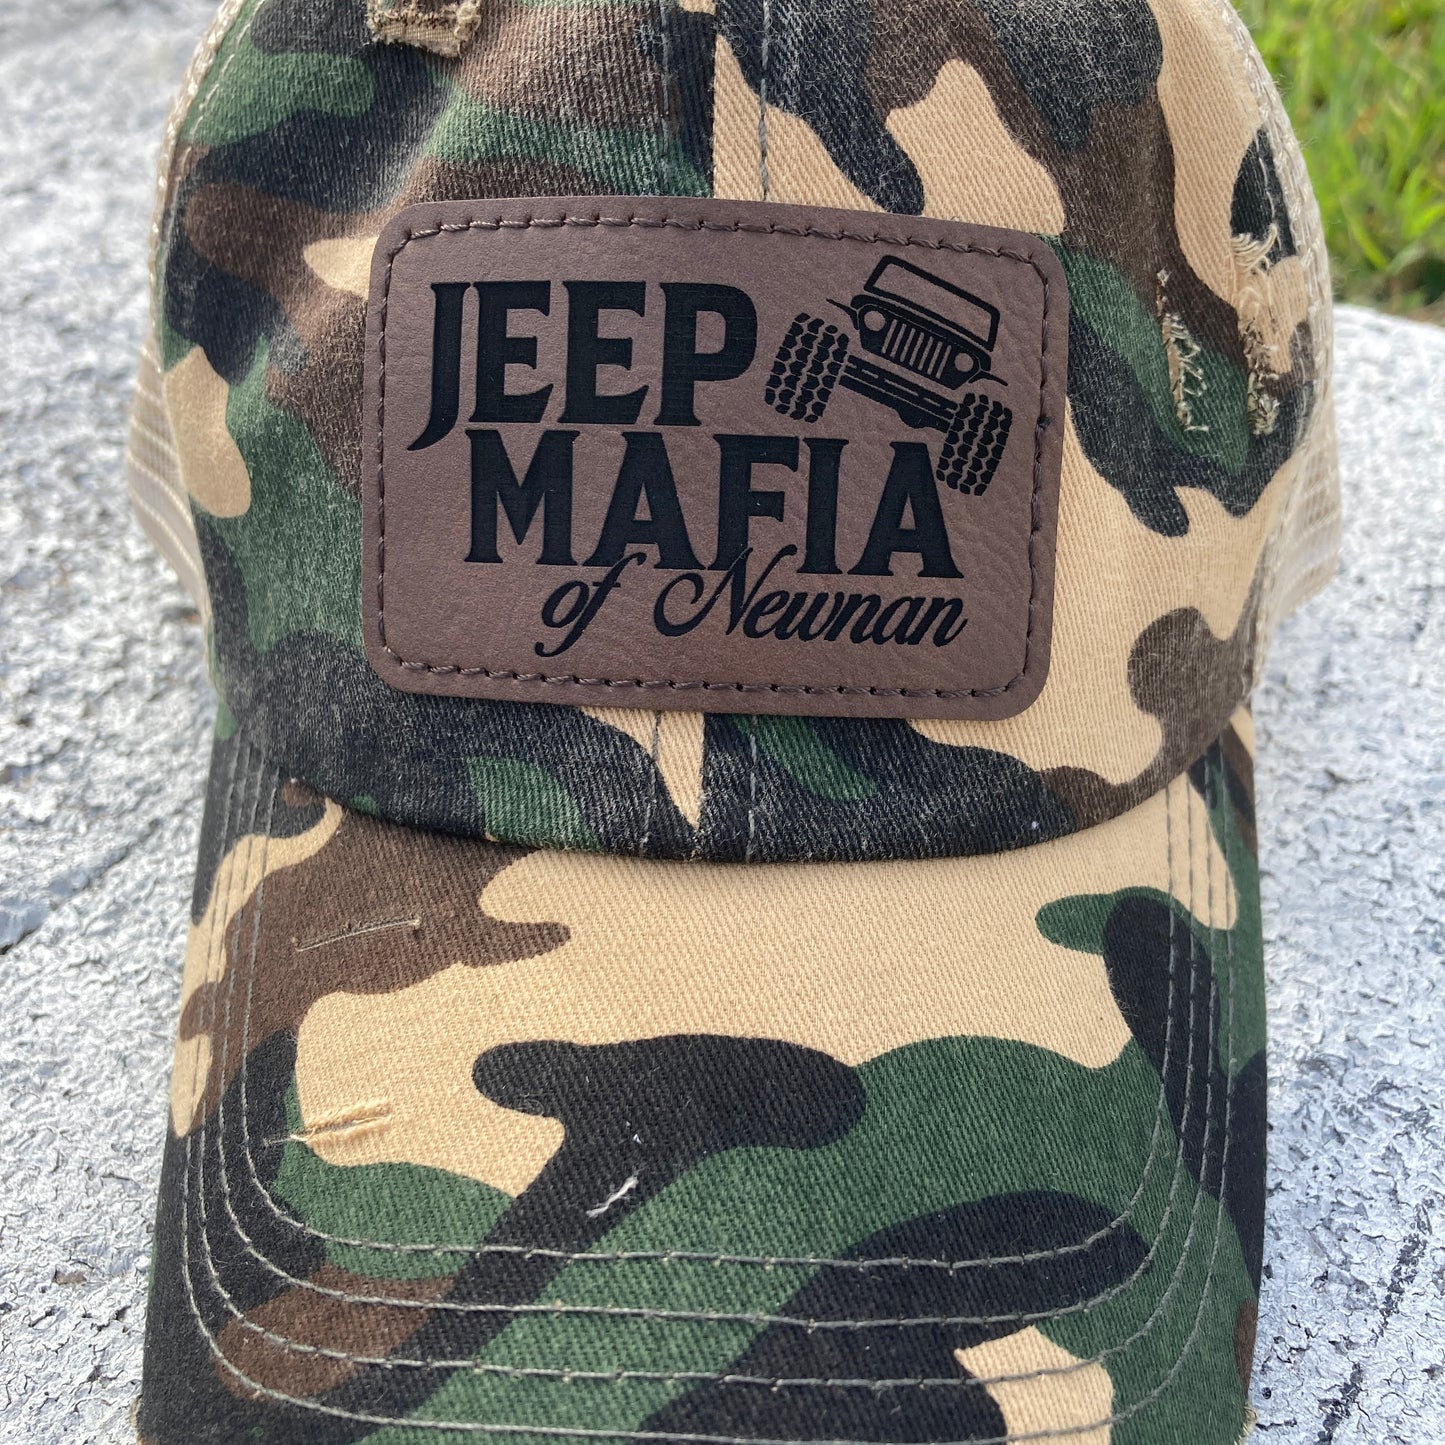 Ponytail Hat with the Jeep Mafia of Newnan Patch